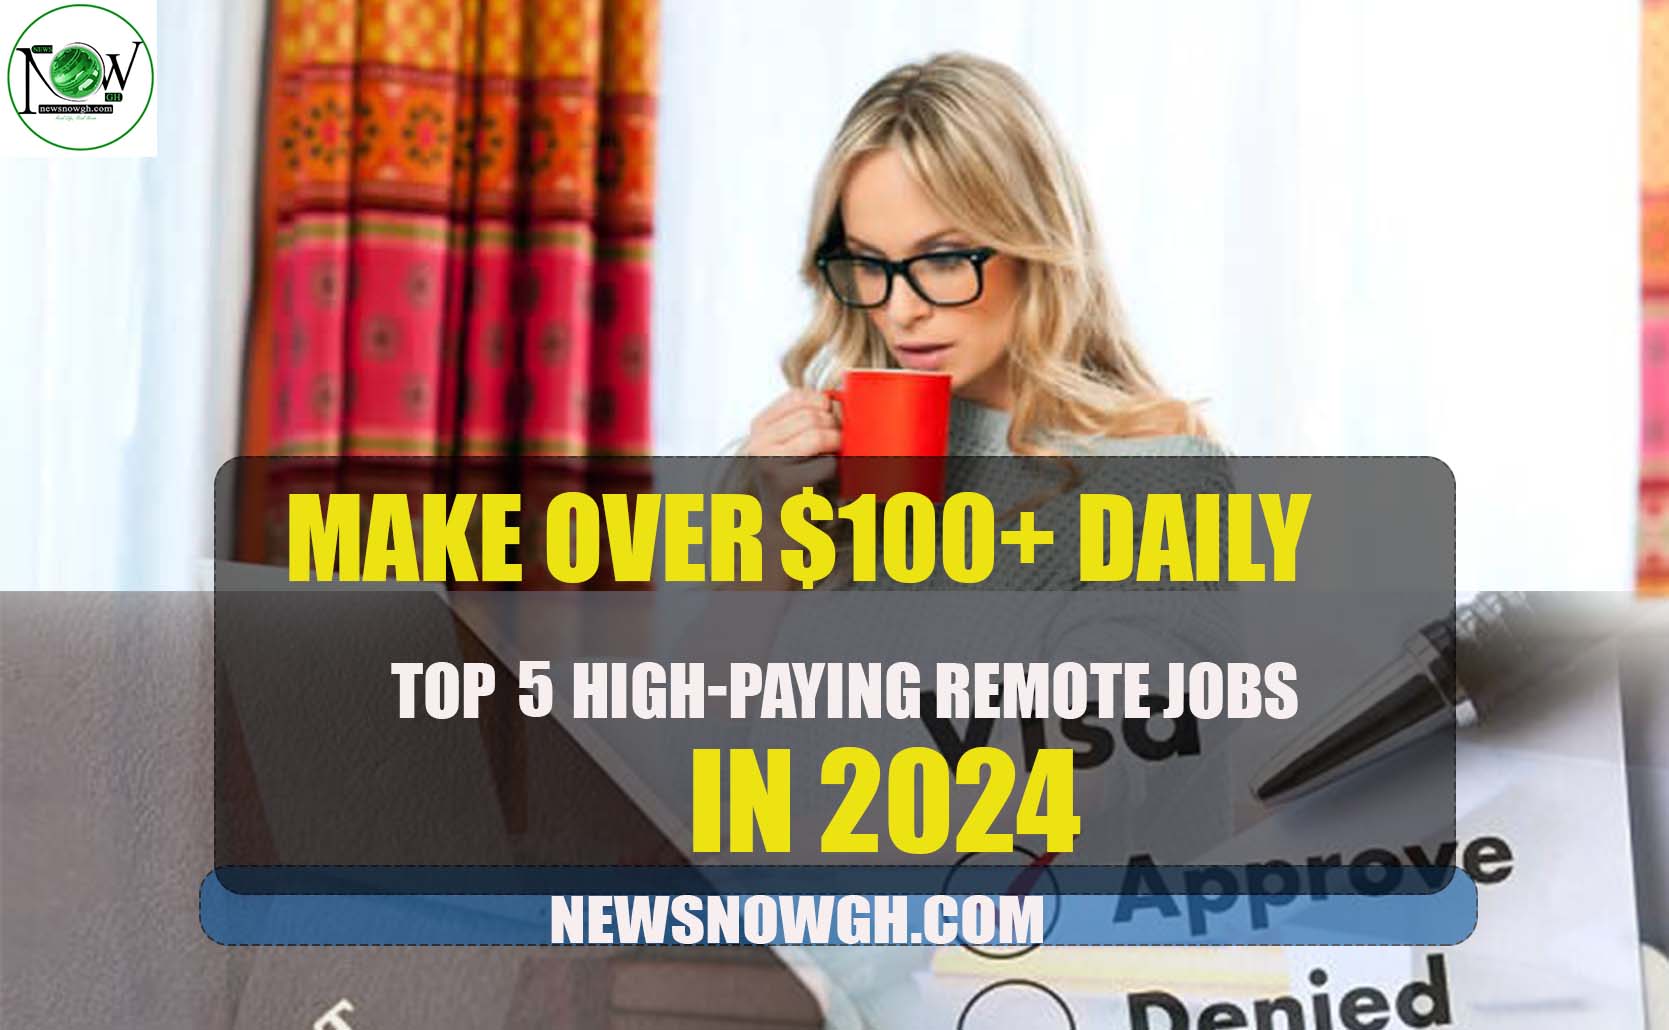 Top 5 HighPaying Remote Jobs in 2024